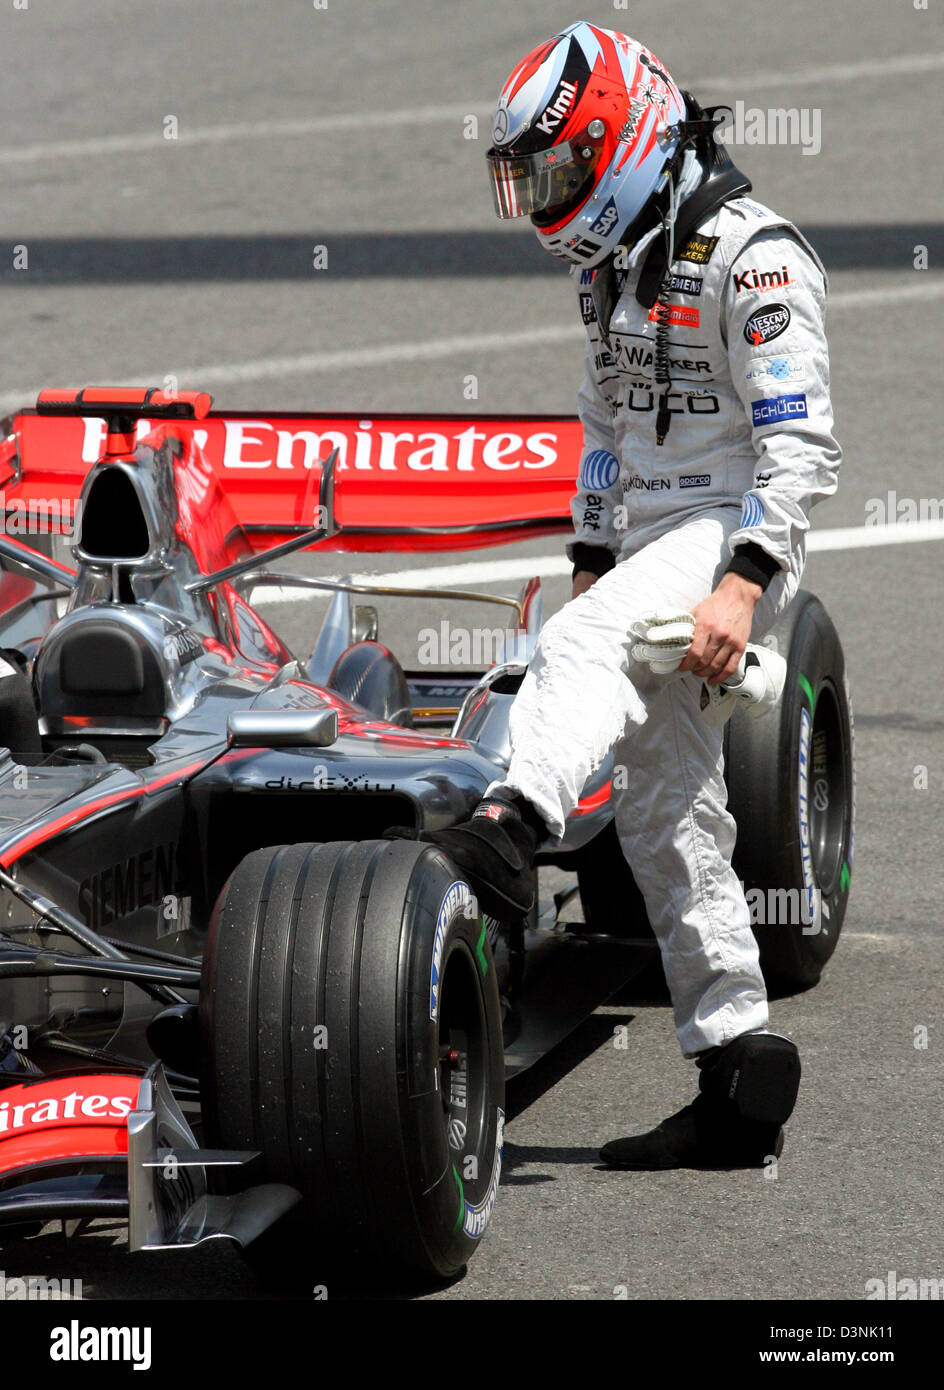 Finnish Formula One pilot Kimi Raikkonen reacts after his car broke down  during the first practice session in Monte Carlo, Monaco, Thursday, 25 May  2006. The Monaco Grand Prix will take place